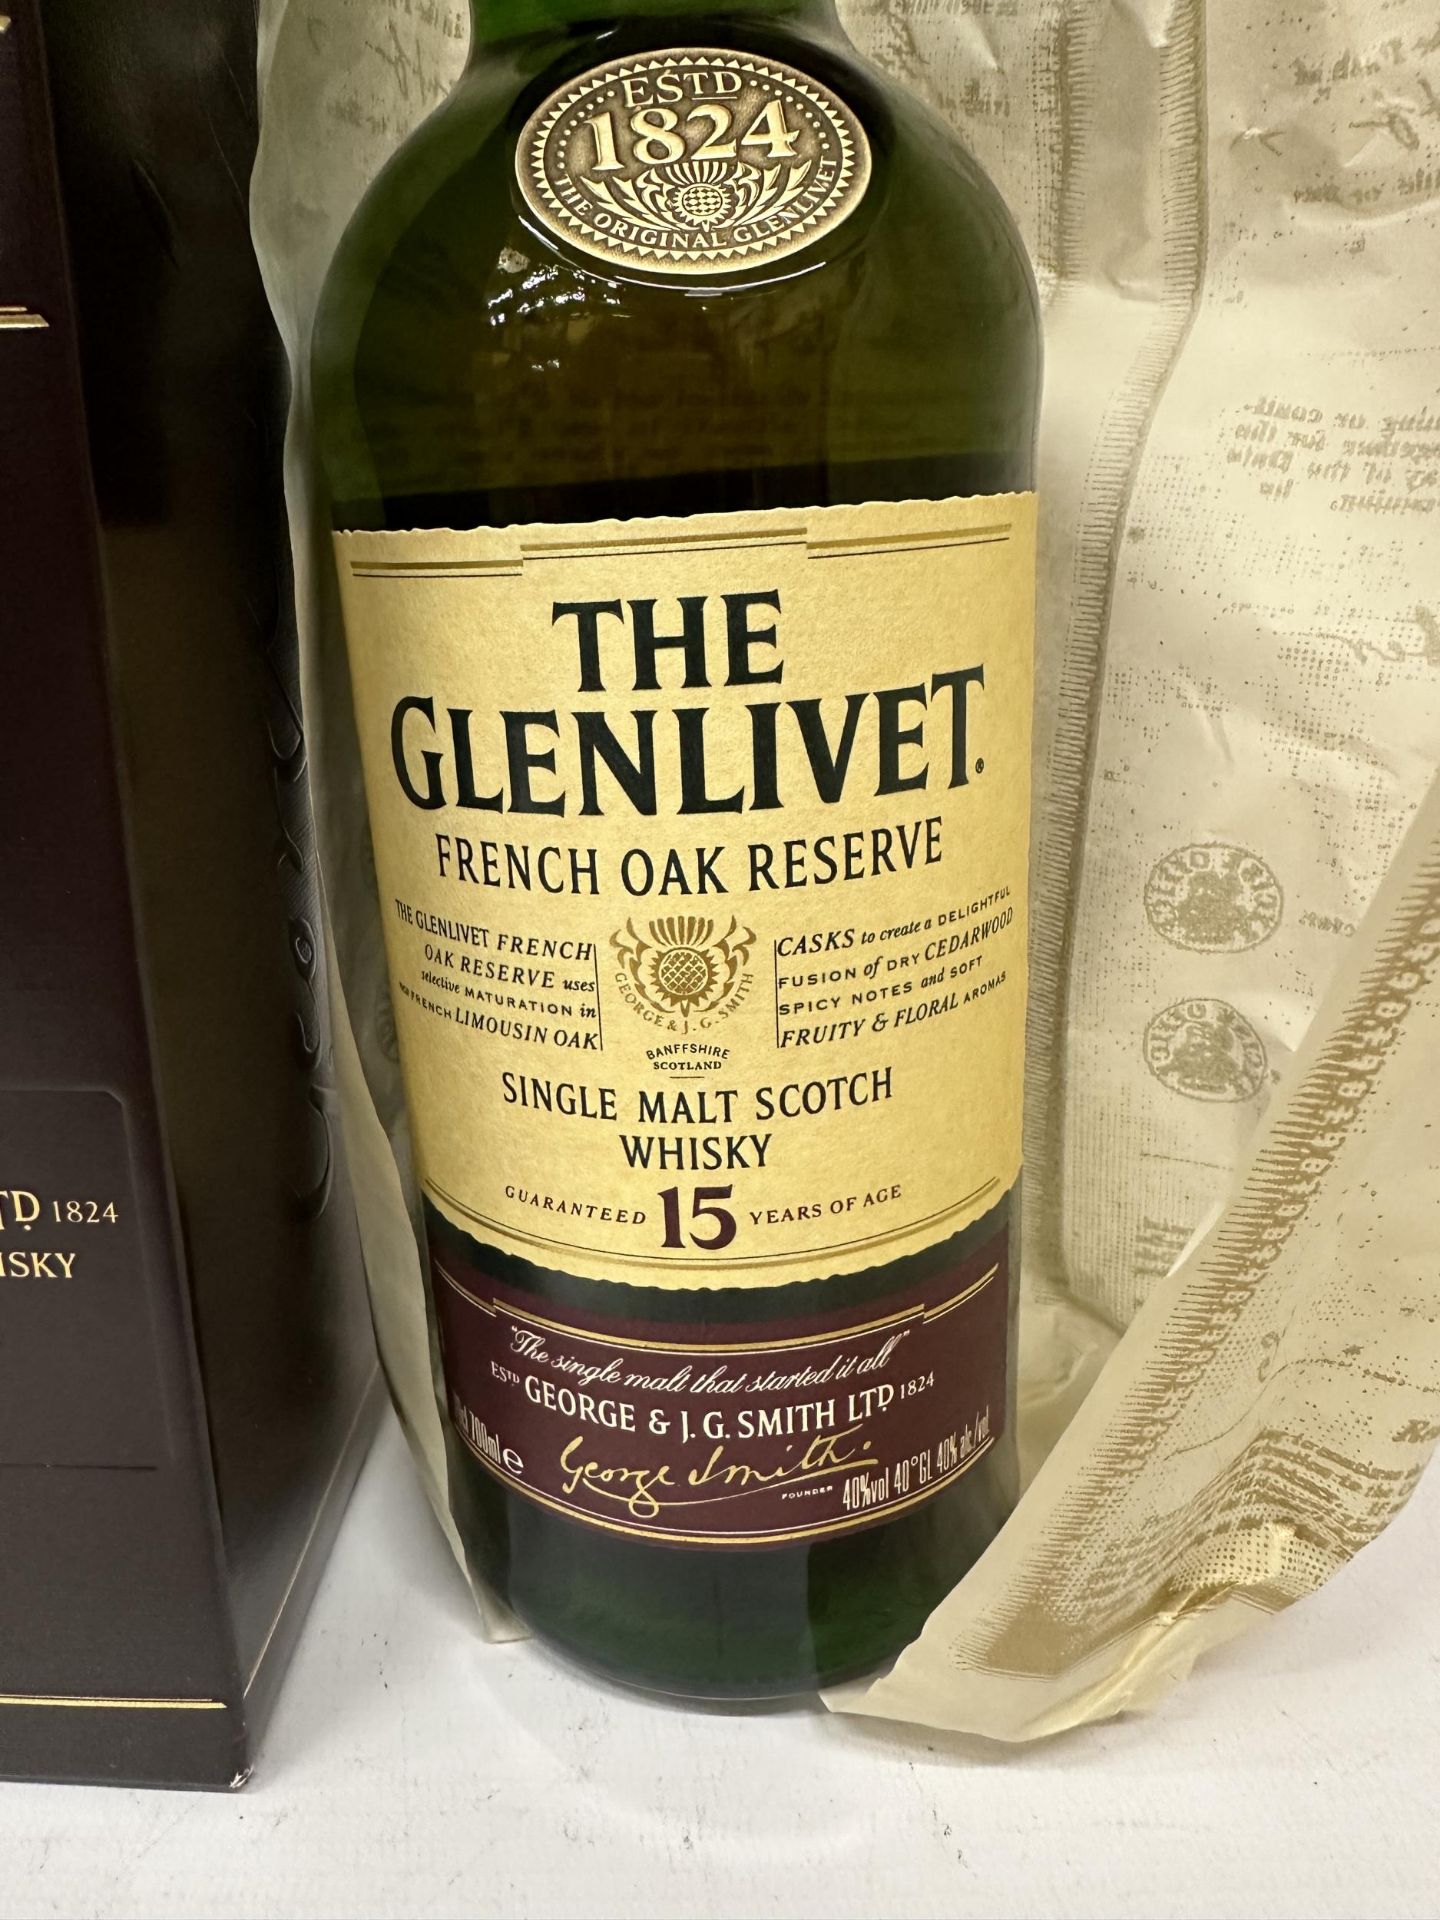 A BOXED 70CL 40% 15 YEARS OF AGE FRENCH OAK RESERVE SINGLE MALT SCOTCH WHISKY - Image 2 of 4